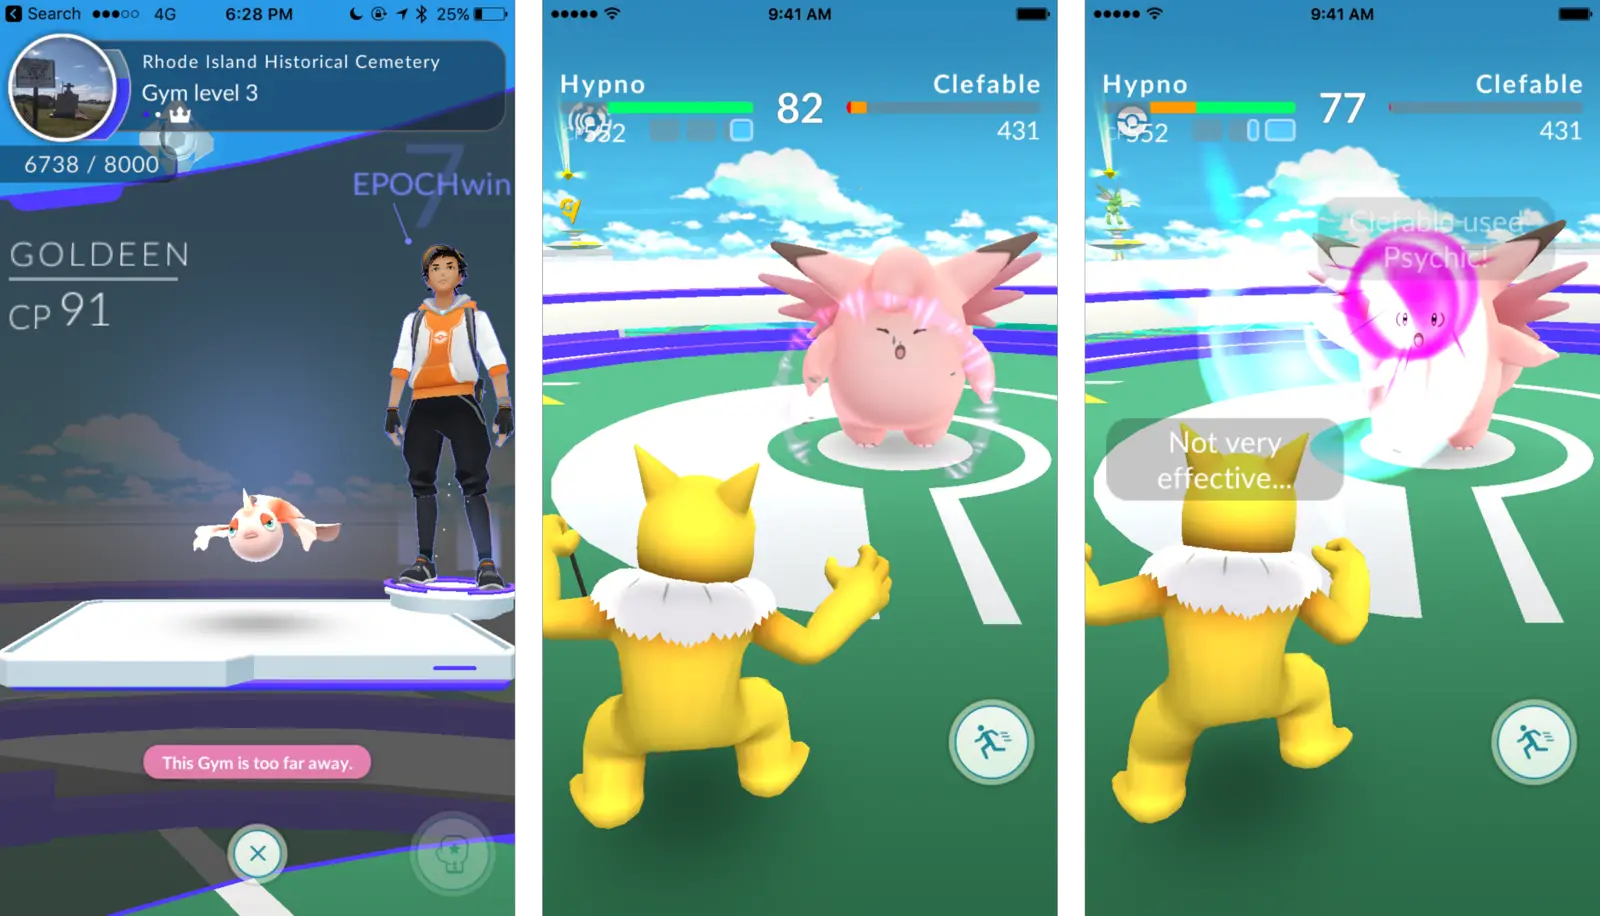 Best way to win battles and conquer gyms in Pokémon Go